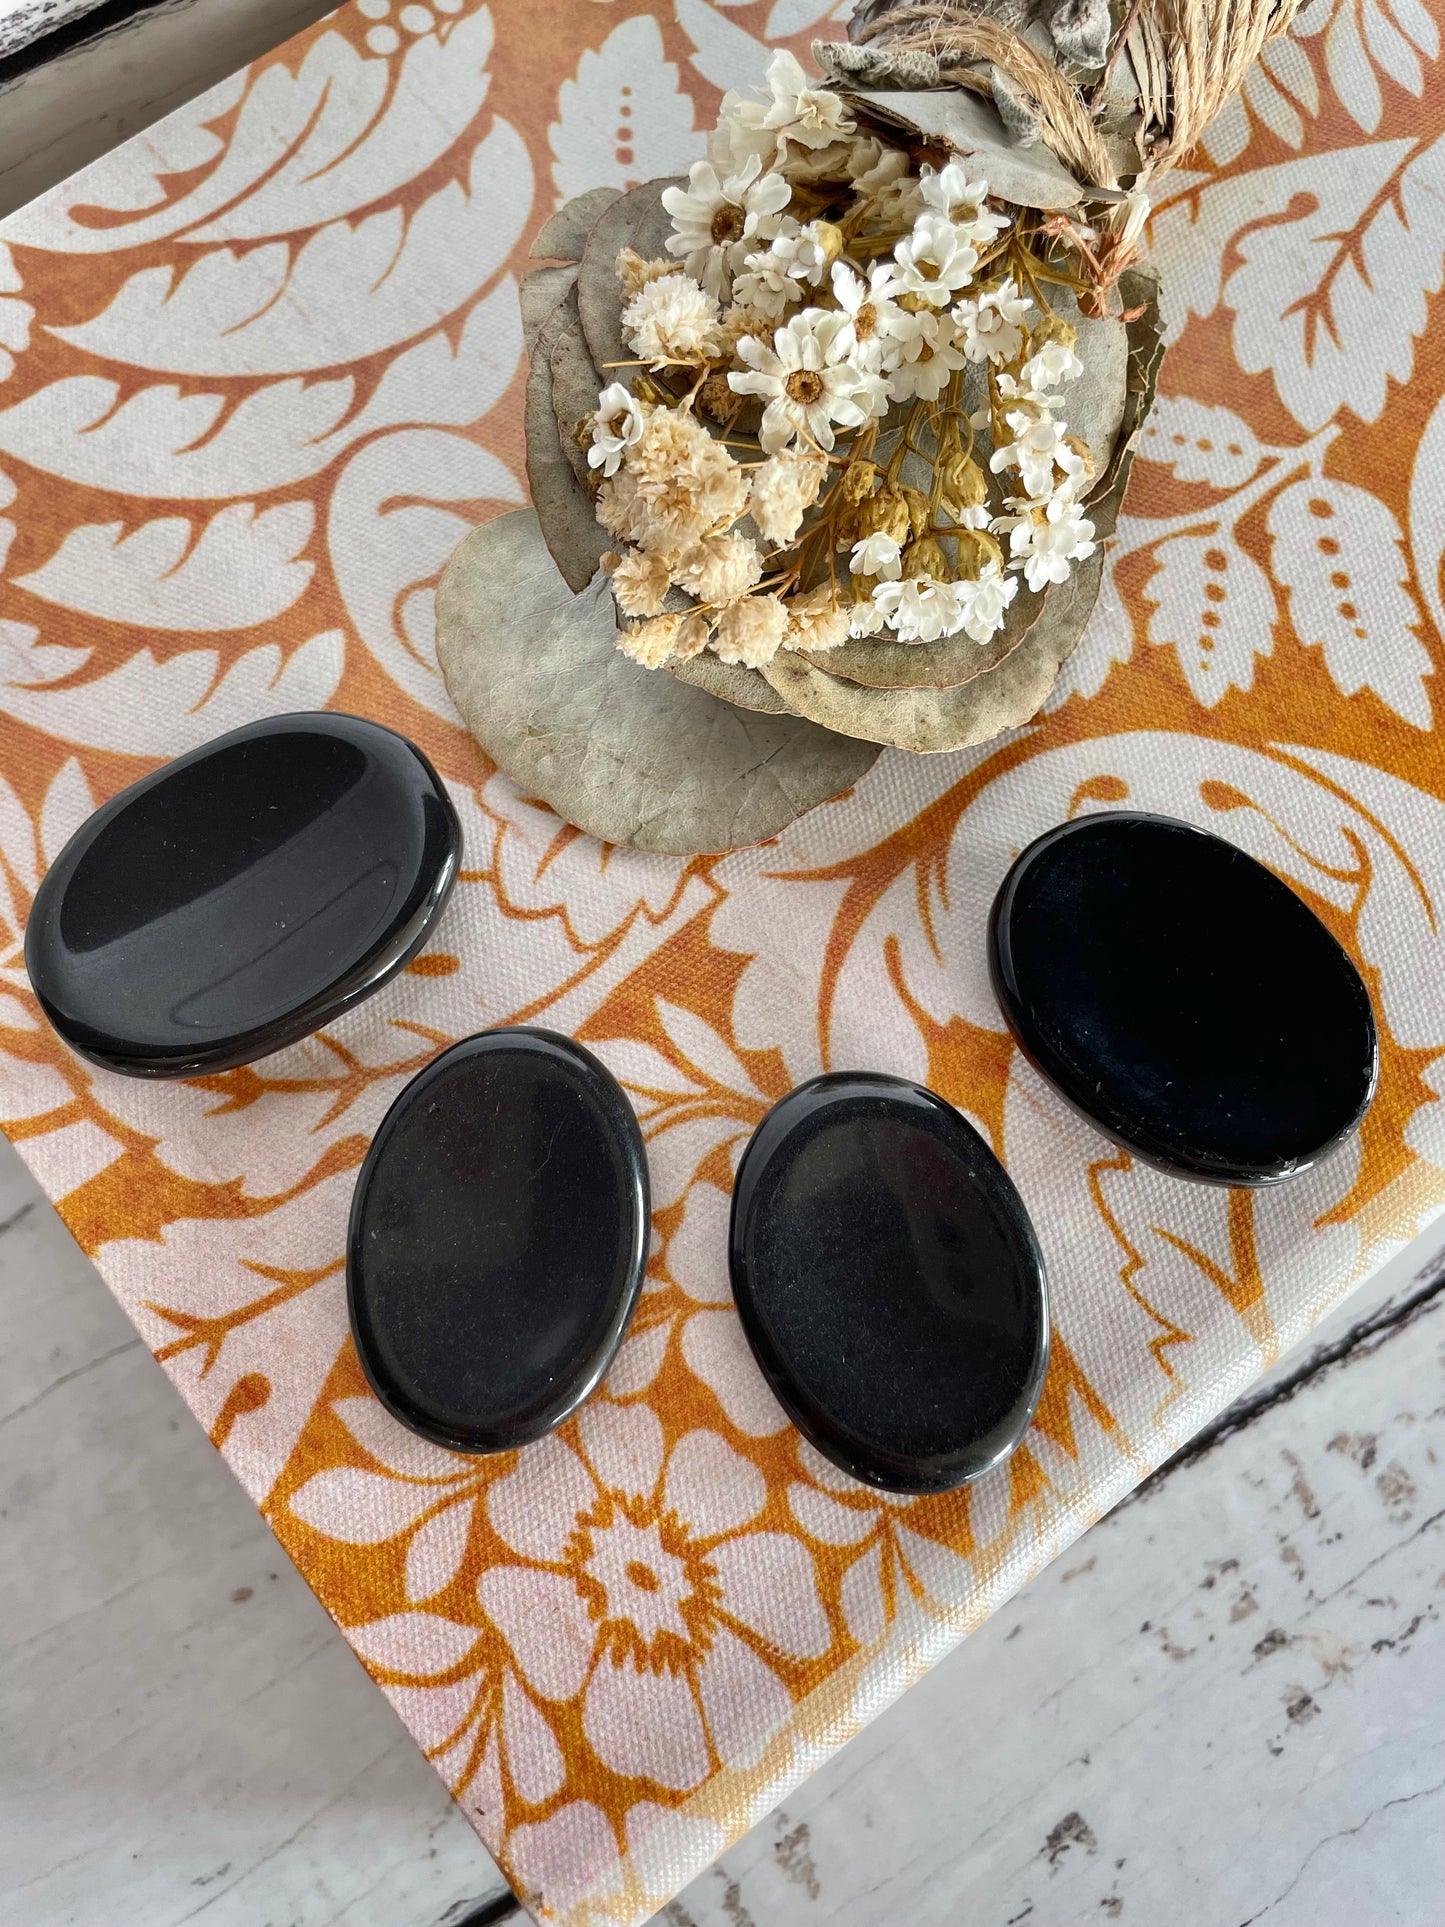 INTUITIVELY CHOSEN ~ Black Obsidian Thumb/Worry Stone